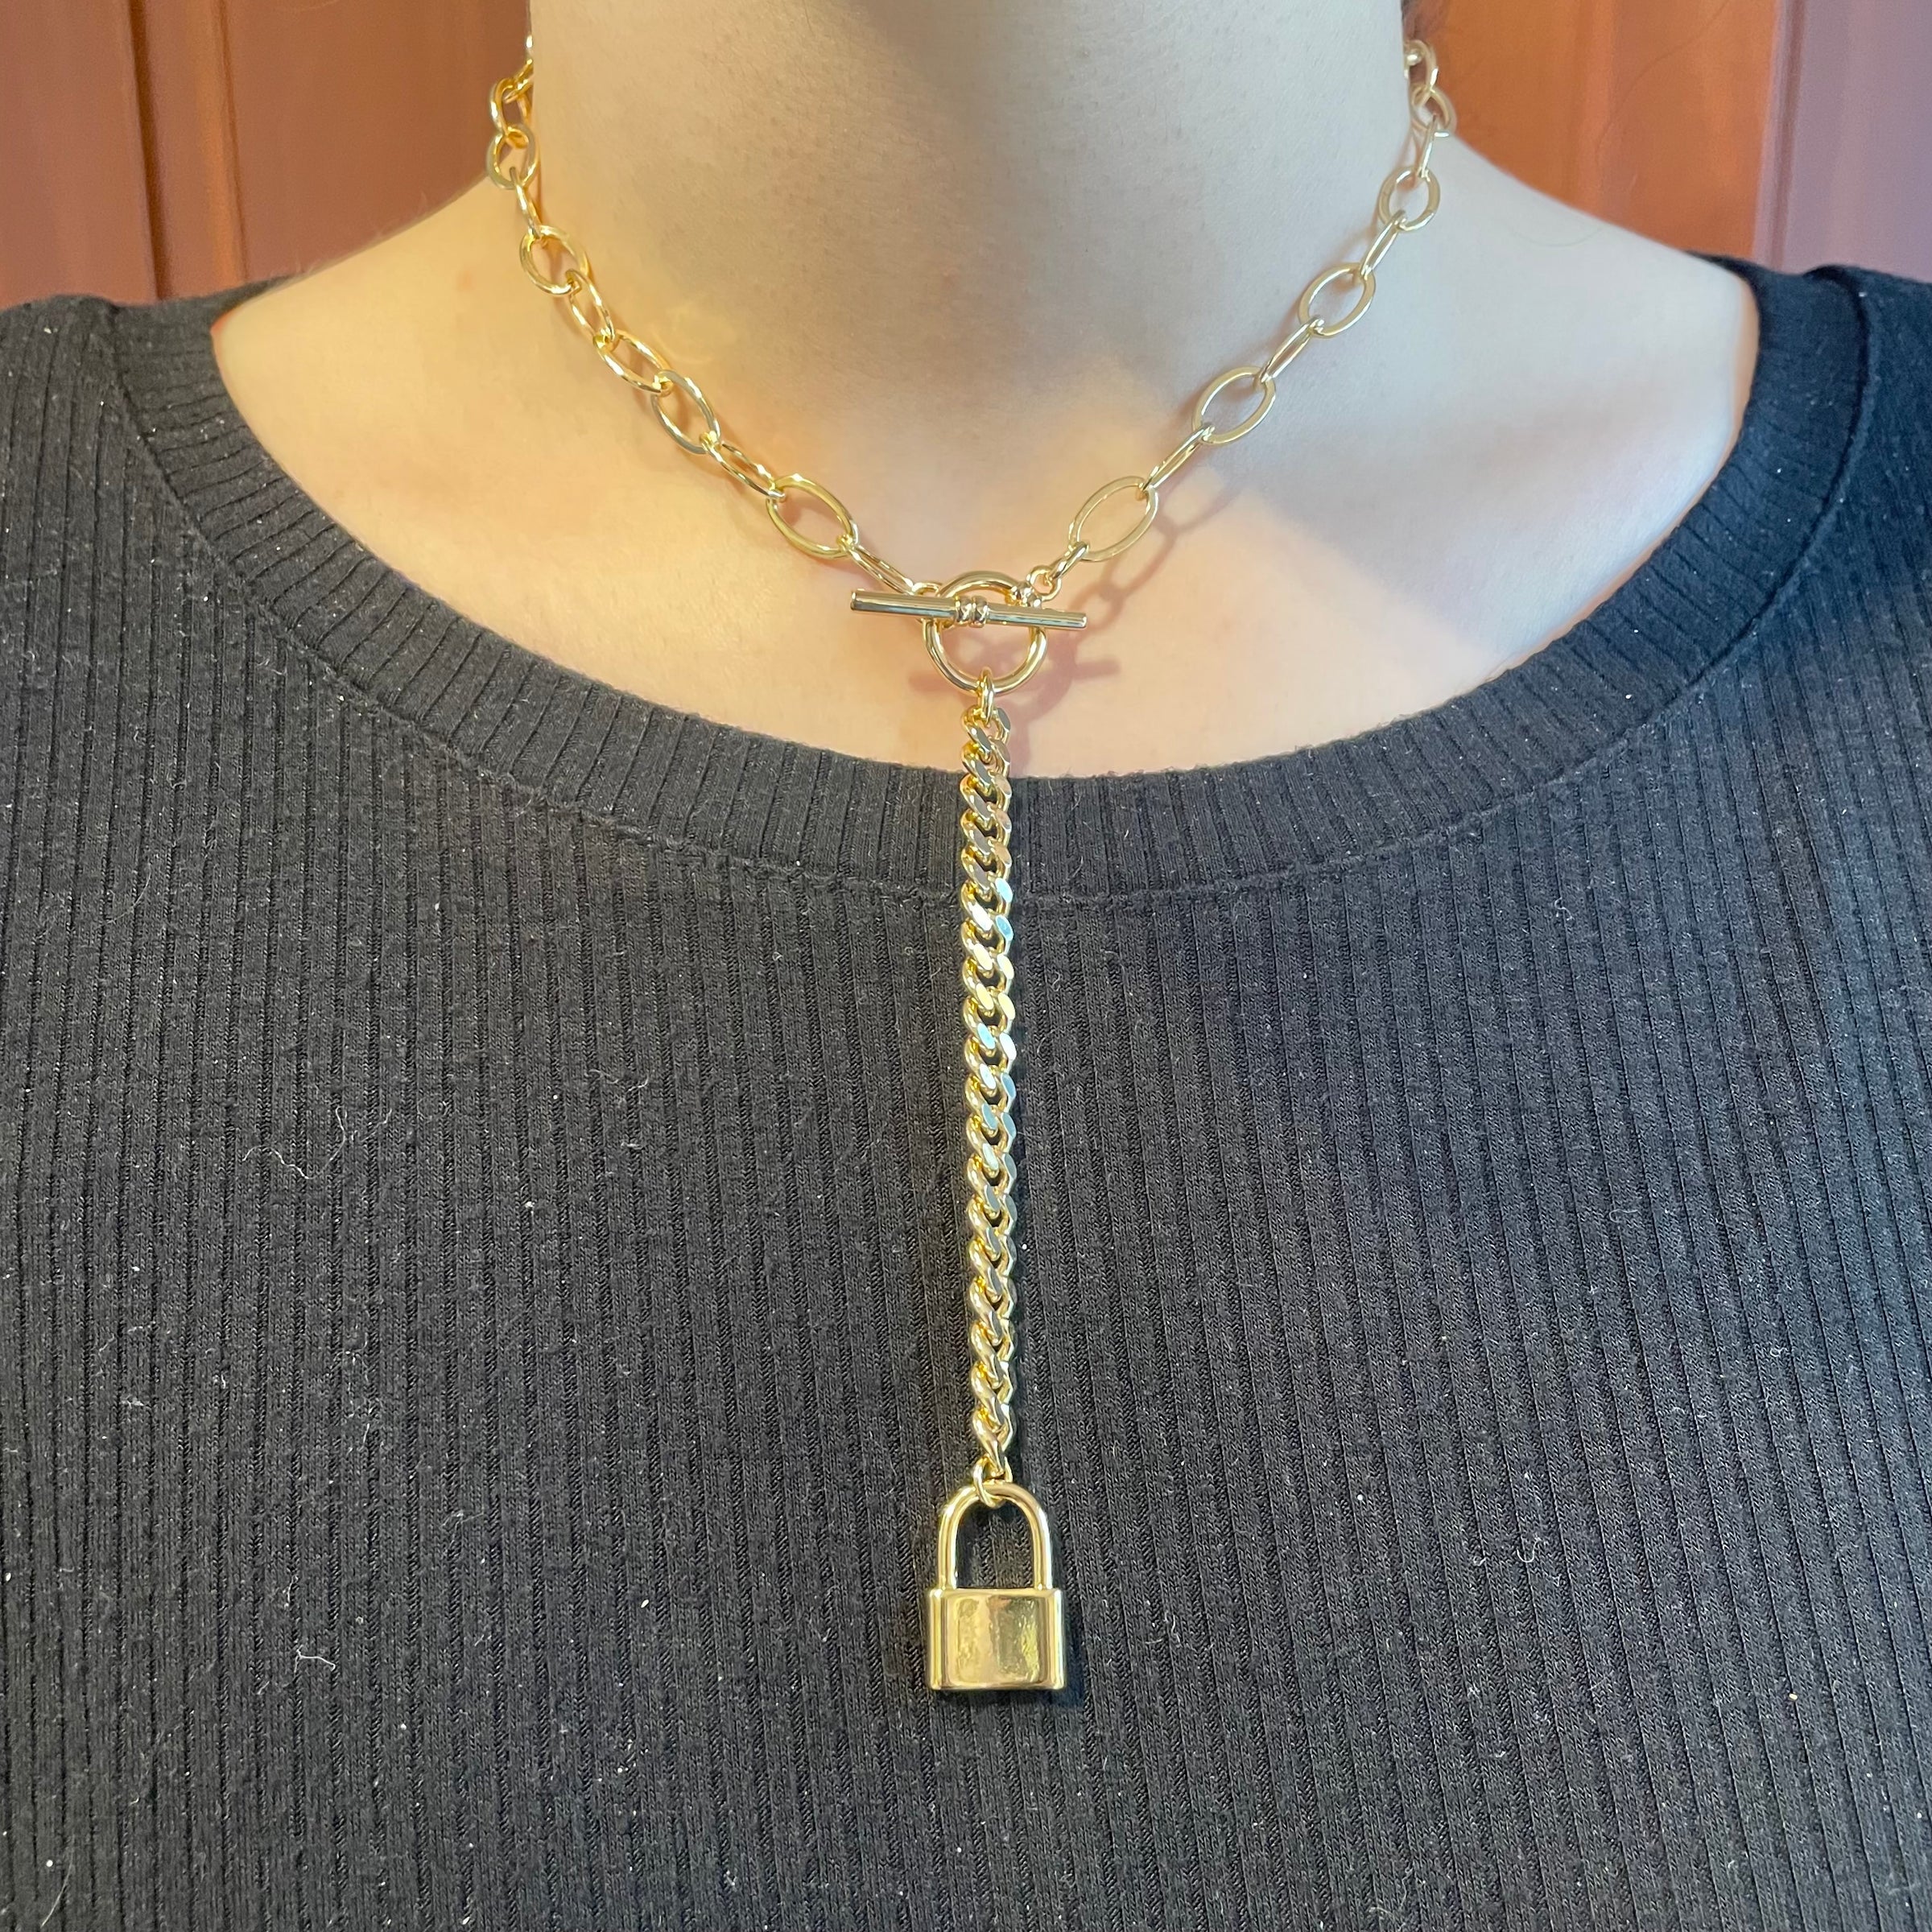 LV Necklace, Lock Necklaces, Gold Jewelry, Gold Necklaces, Hoop